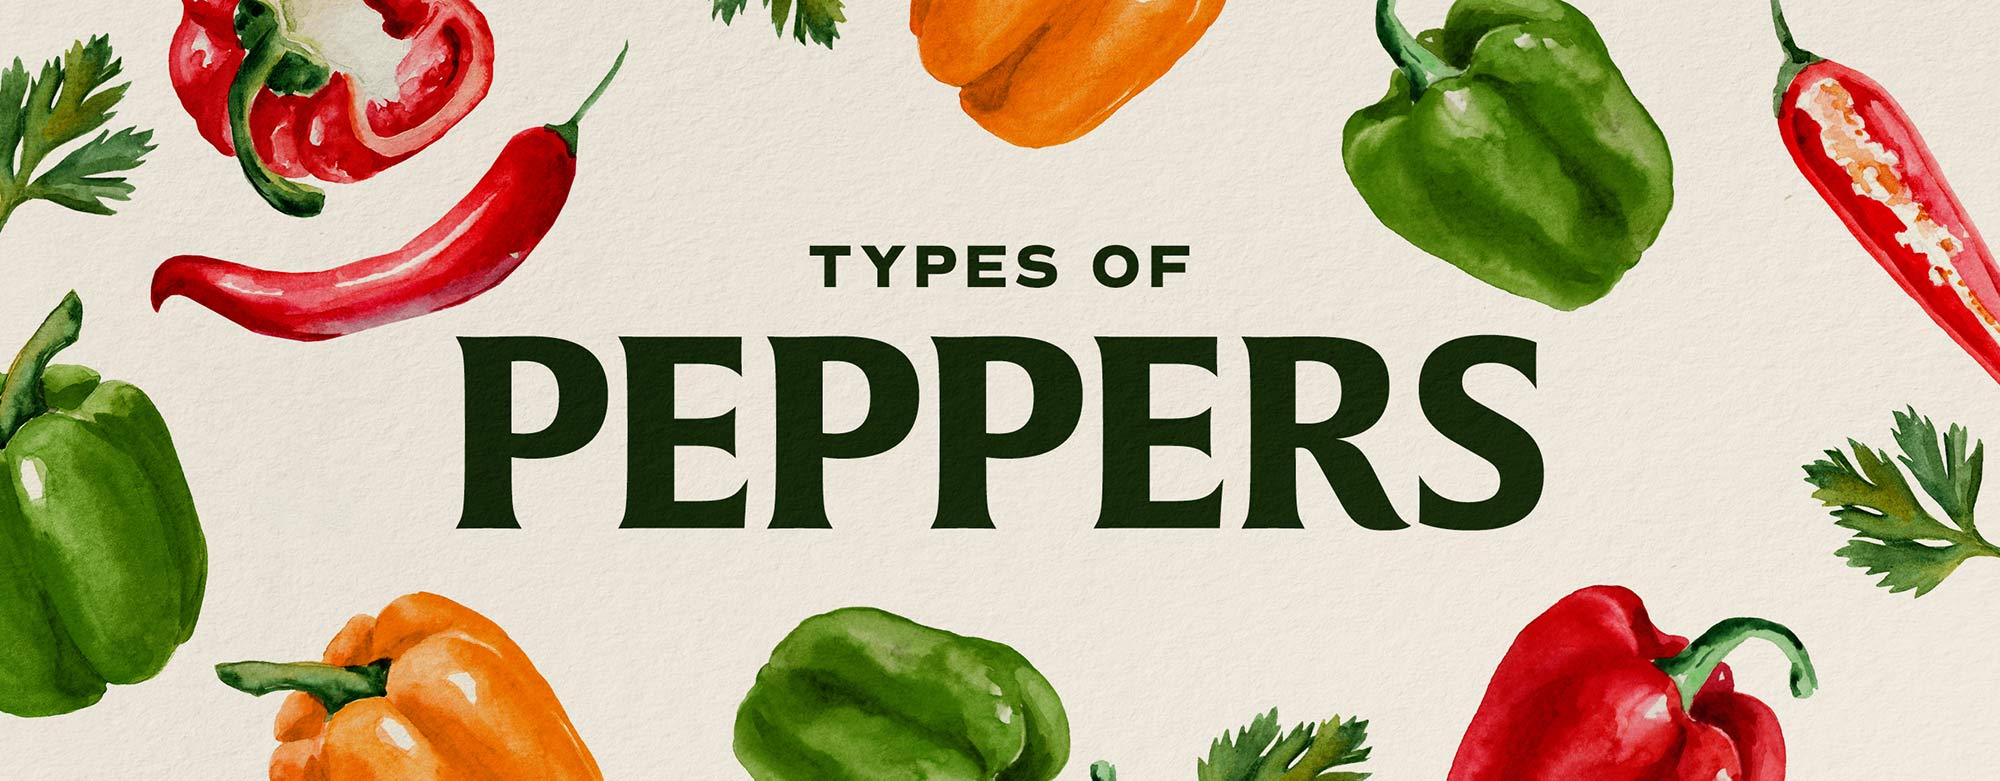 Types of Peppers 